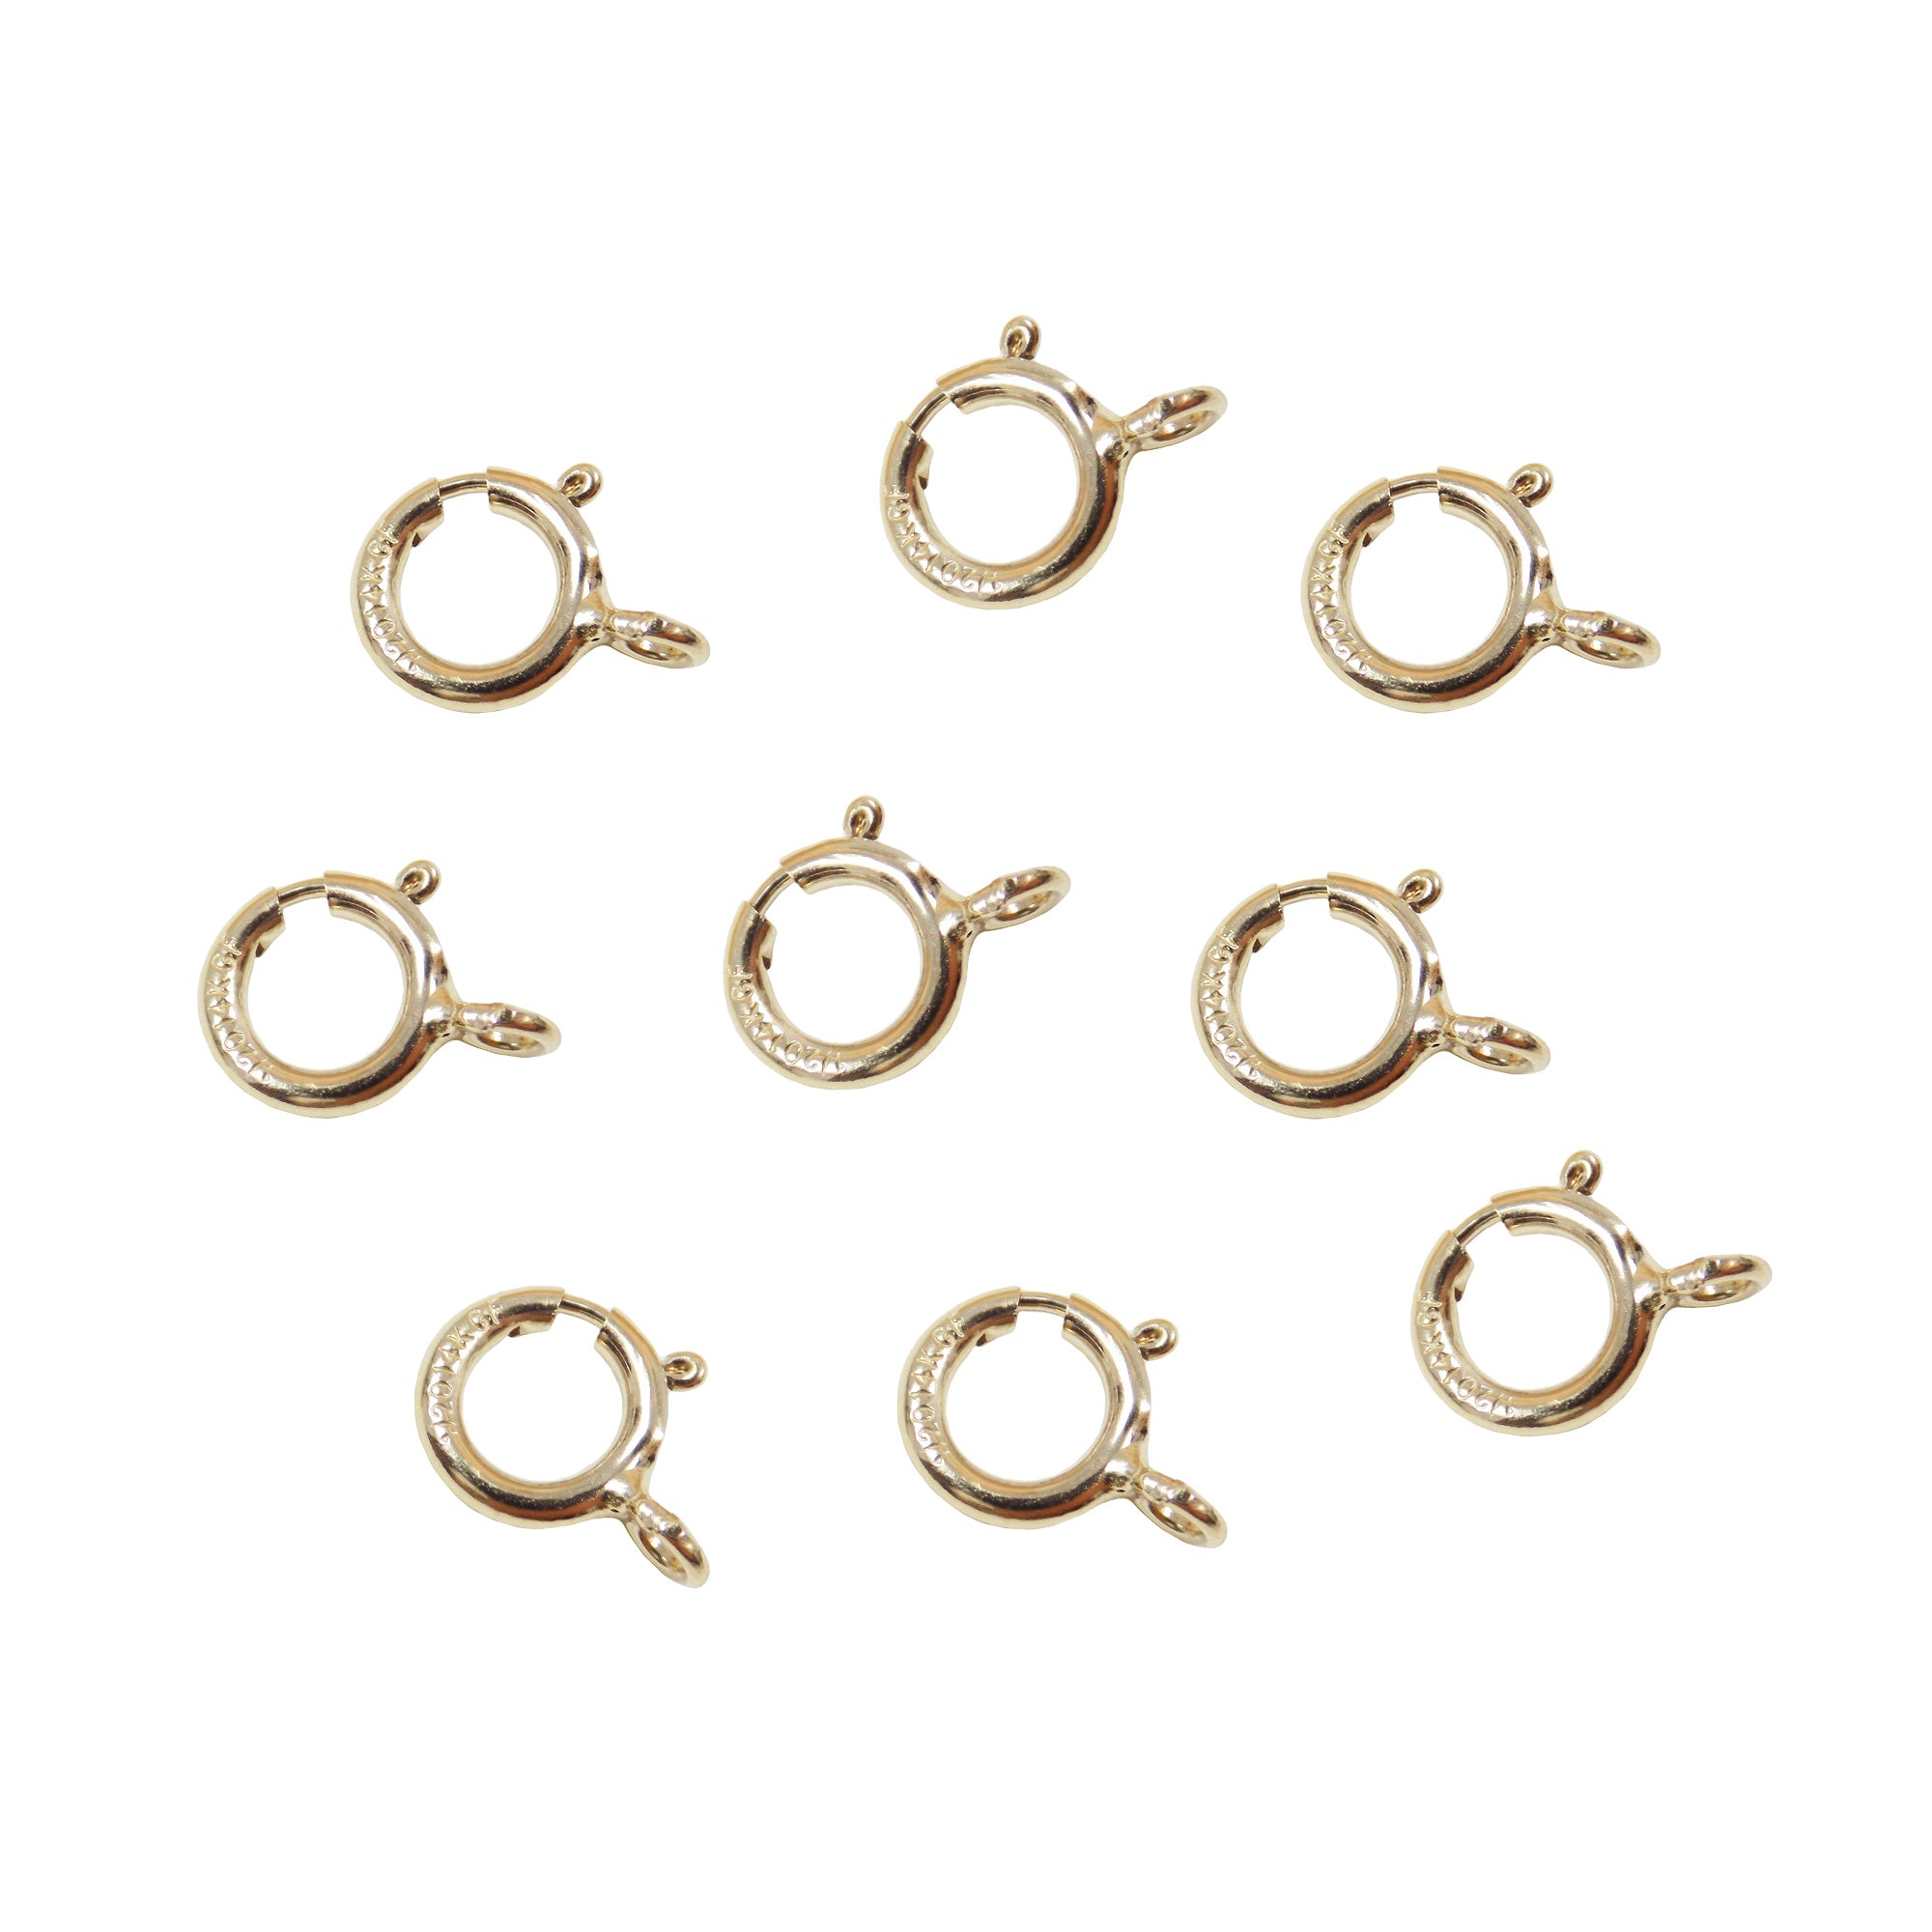 Gold Filled Spring Ring Clasp 5.5mm Made in Italy, 14KT Goldfilled Clasp Light w/Open Ring Wholesale